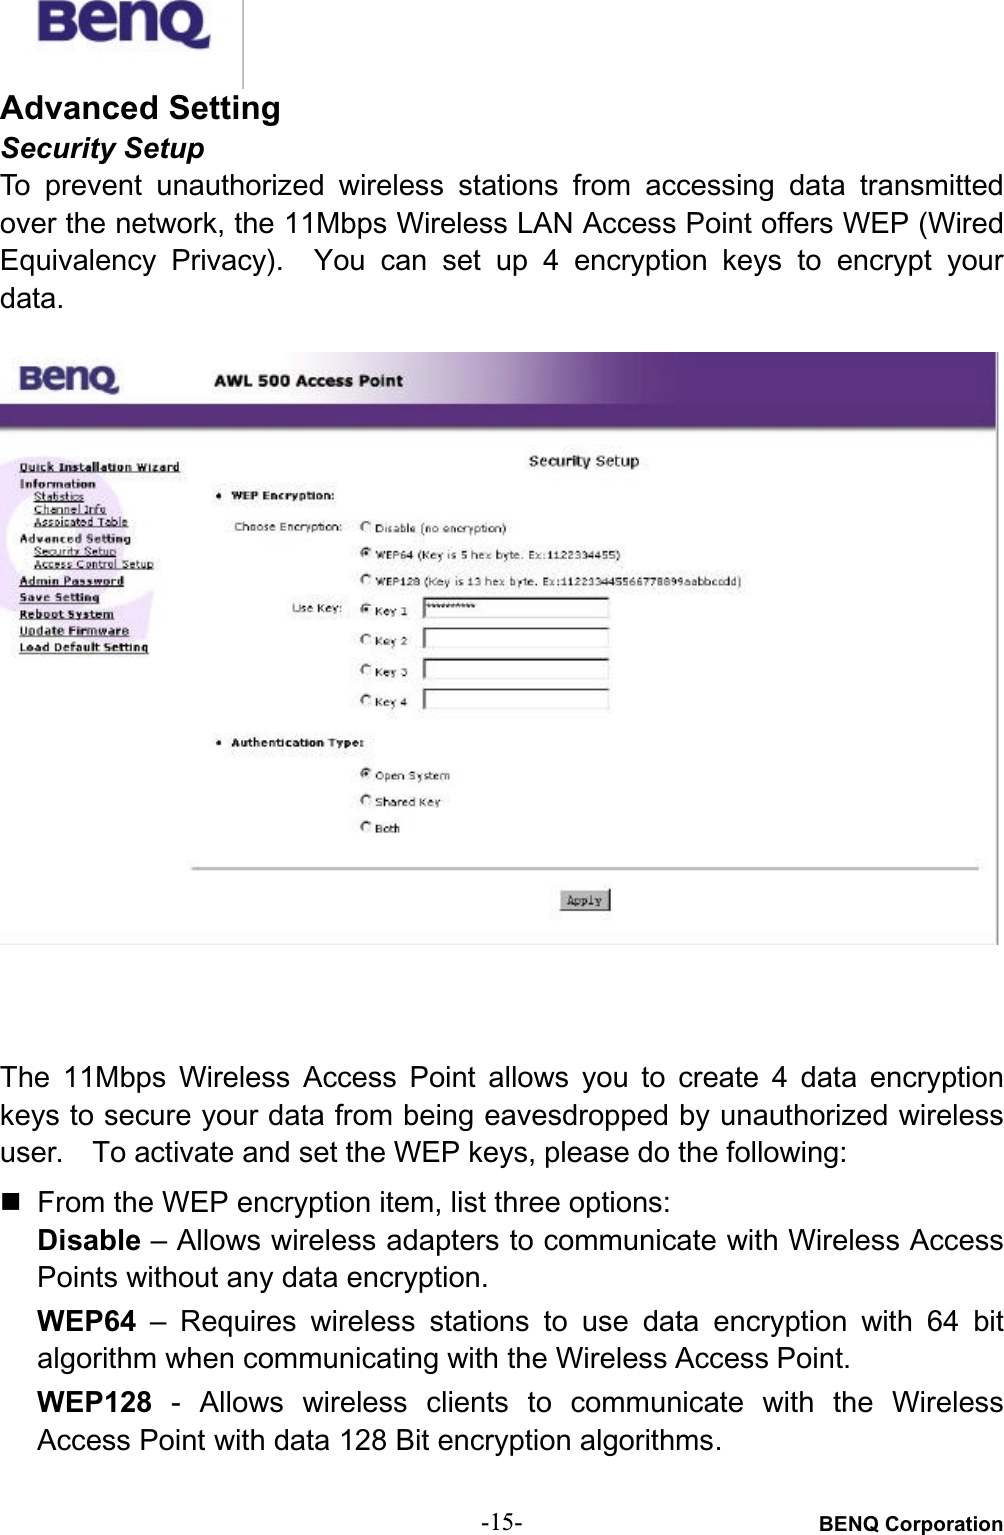 BENQ Corporation-15-Advanced SettingSecurity SetupTo  prevent  unauthorized  wireless stations  from  accessing  data  transmittedover the network, the 11Mbps Wireless LAN Access Point offers WEP (WiredEquivalency  Privacy). You  can  set  up  4 encryption  keys to encrypt  yourdata.The 11Mbps  Wireless  Access  Point  allows  you  to  create  4  data  encryptionkeys to secure your data from being eavesdropped by unauthorized wirelessuser. To activate and set the WEP keys, please do the following:# From the WEP encryption item, list three options:Disable – Allows wireless adapters to communicate with Wireless AccessPoints without any data encryption.WEP64 –  Requires  wireless  stations  to  use  data  encryption  with  64  bitalgorithm when communicating with the Wireless Access Point.WEP128 - Allows  wireless  clients  to  communicate  with  the WirelessAccess Point with data 128 Bit encryption algorithms.